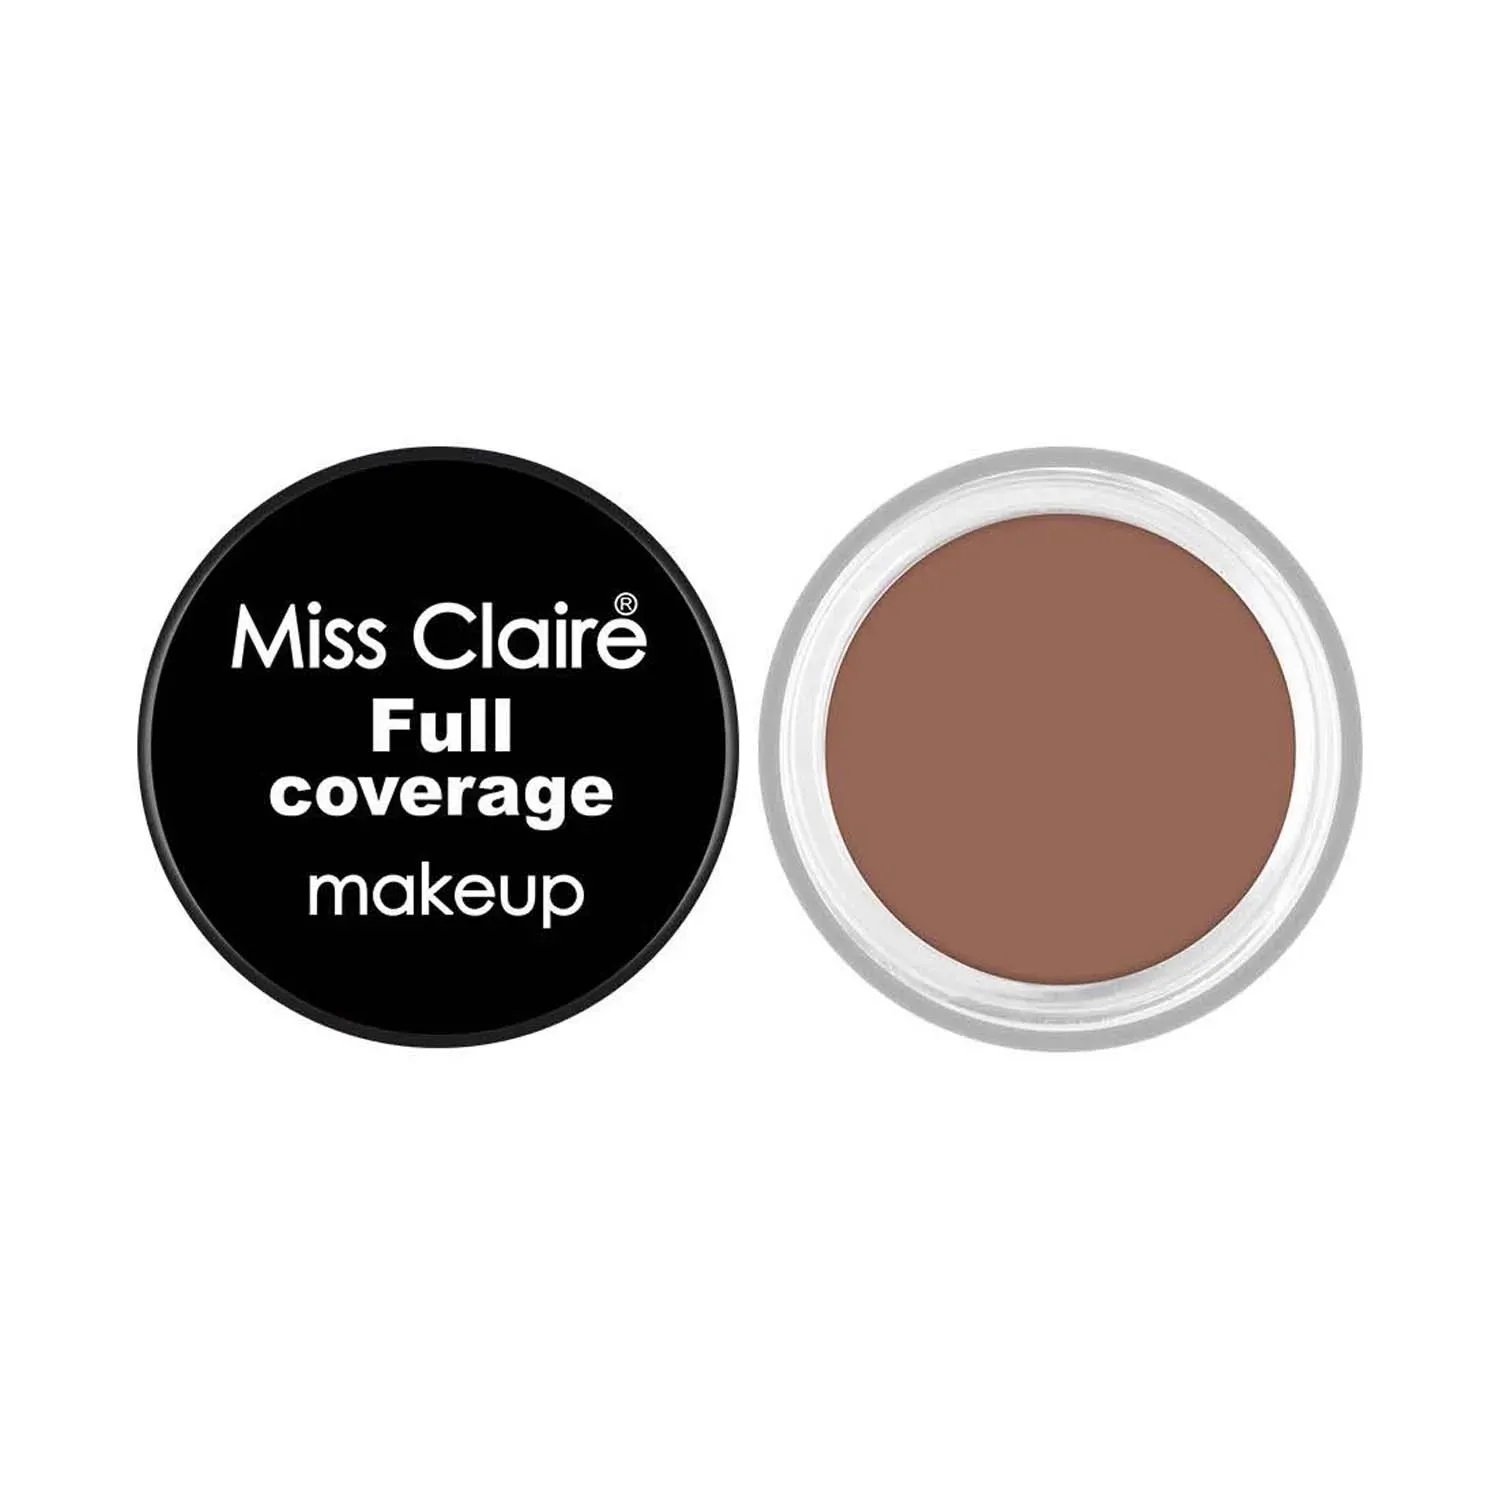 Miss Claire Full Coverage Makeup + Concealer - 17 (6g)